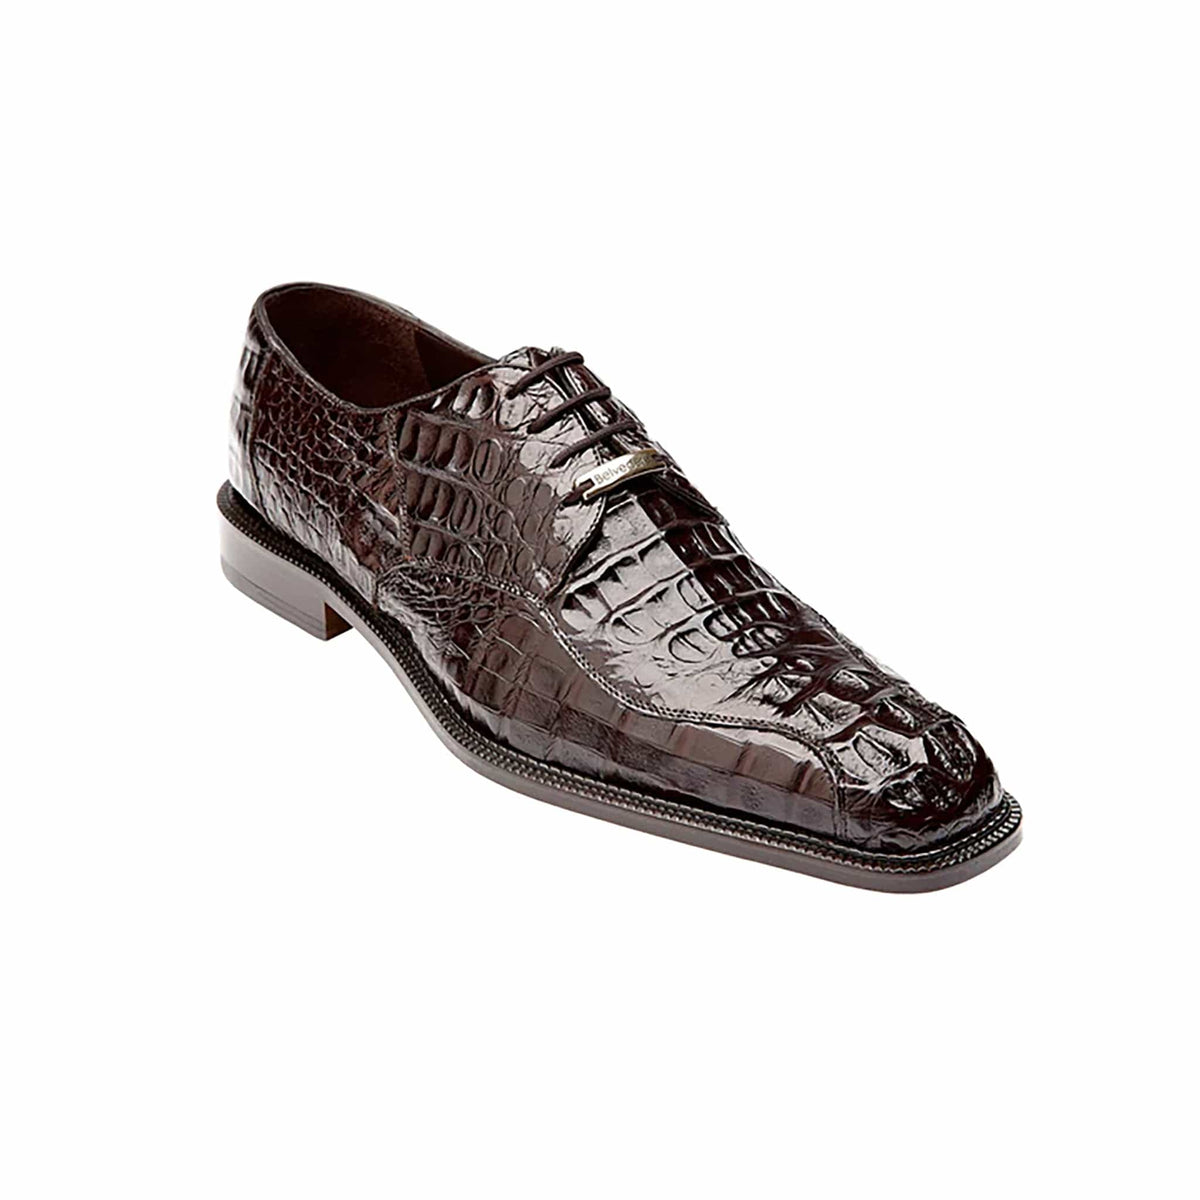 BELVEDERE EXOTIC SHOES BROWN / 9 Belvedere Shose- CHAPO